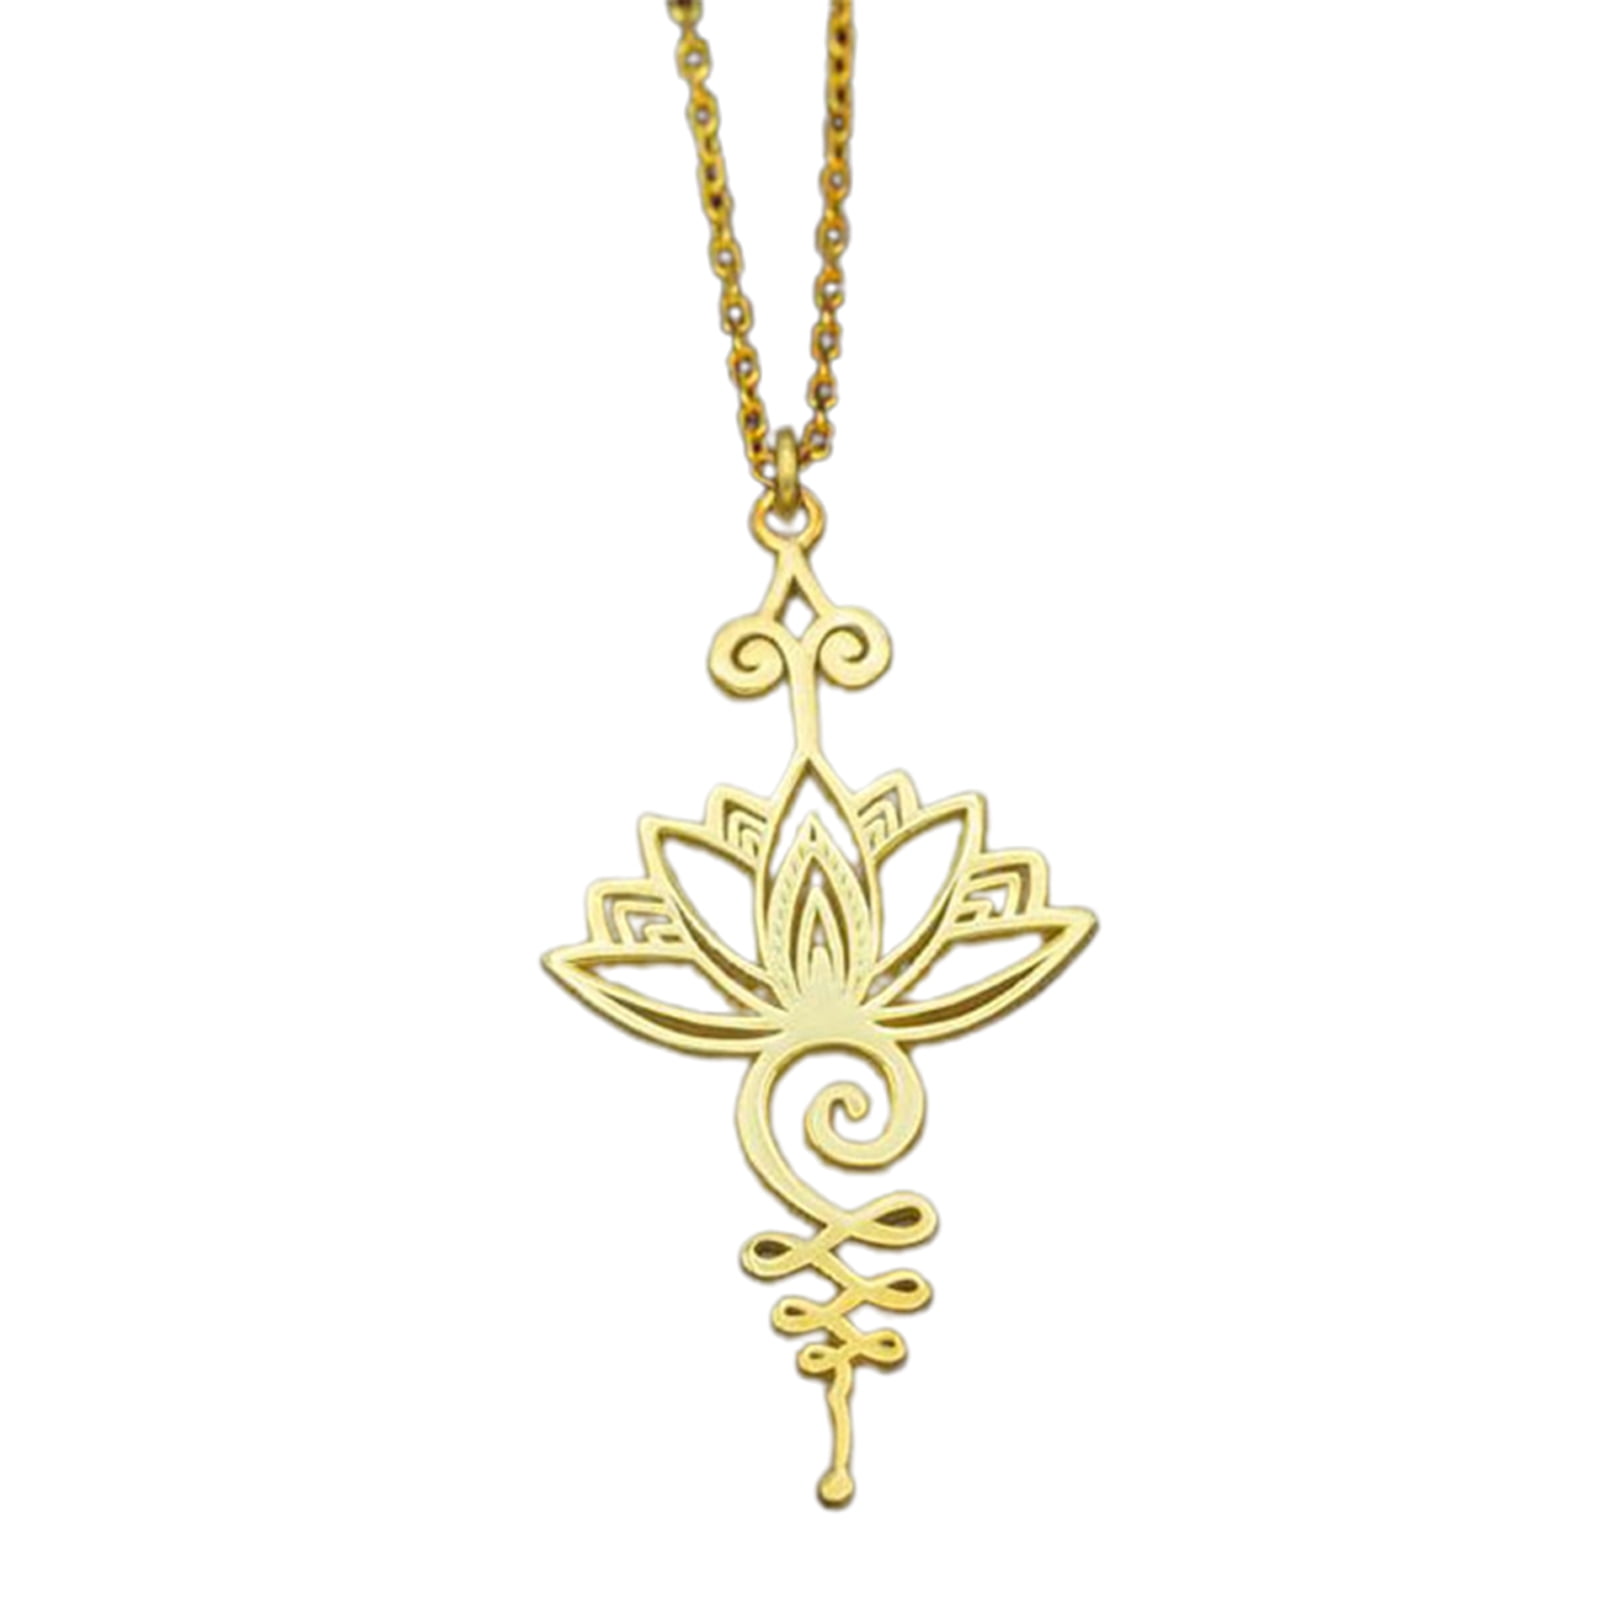 Cat Pendant Necklace Jewelry for Women Kids Gifts Included Free Charm Chain Elegant Lotus 